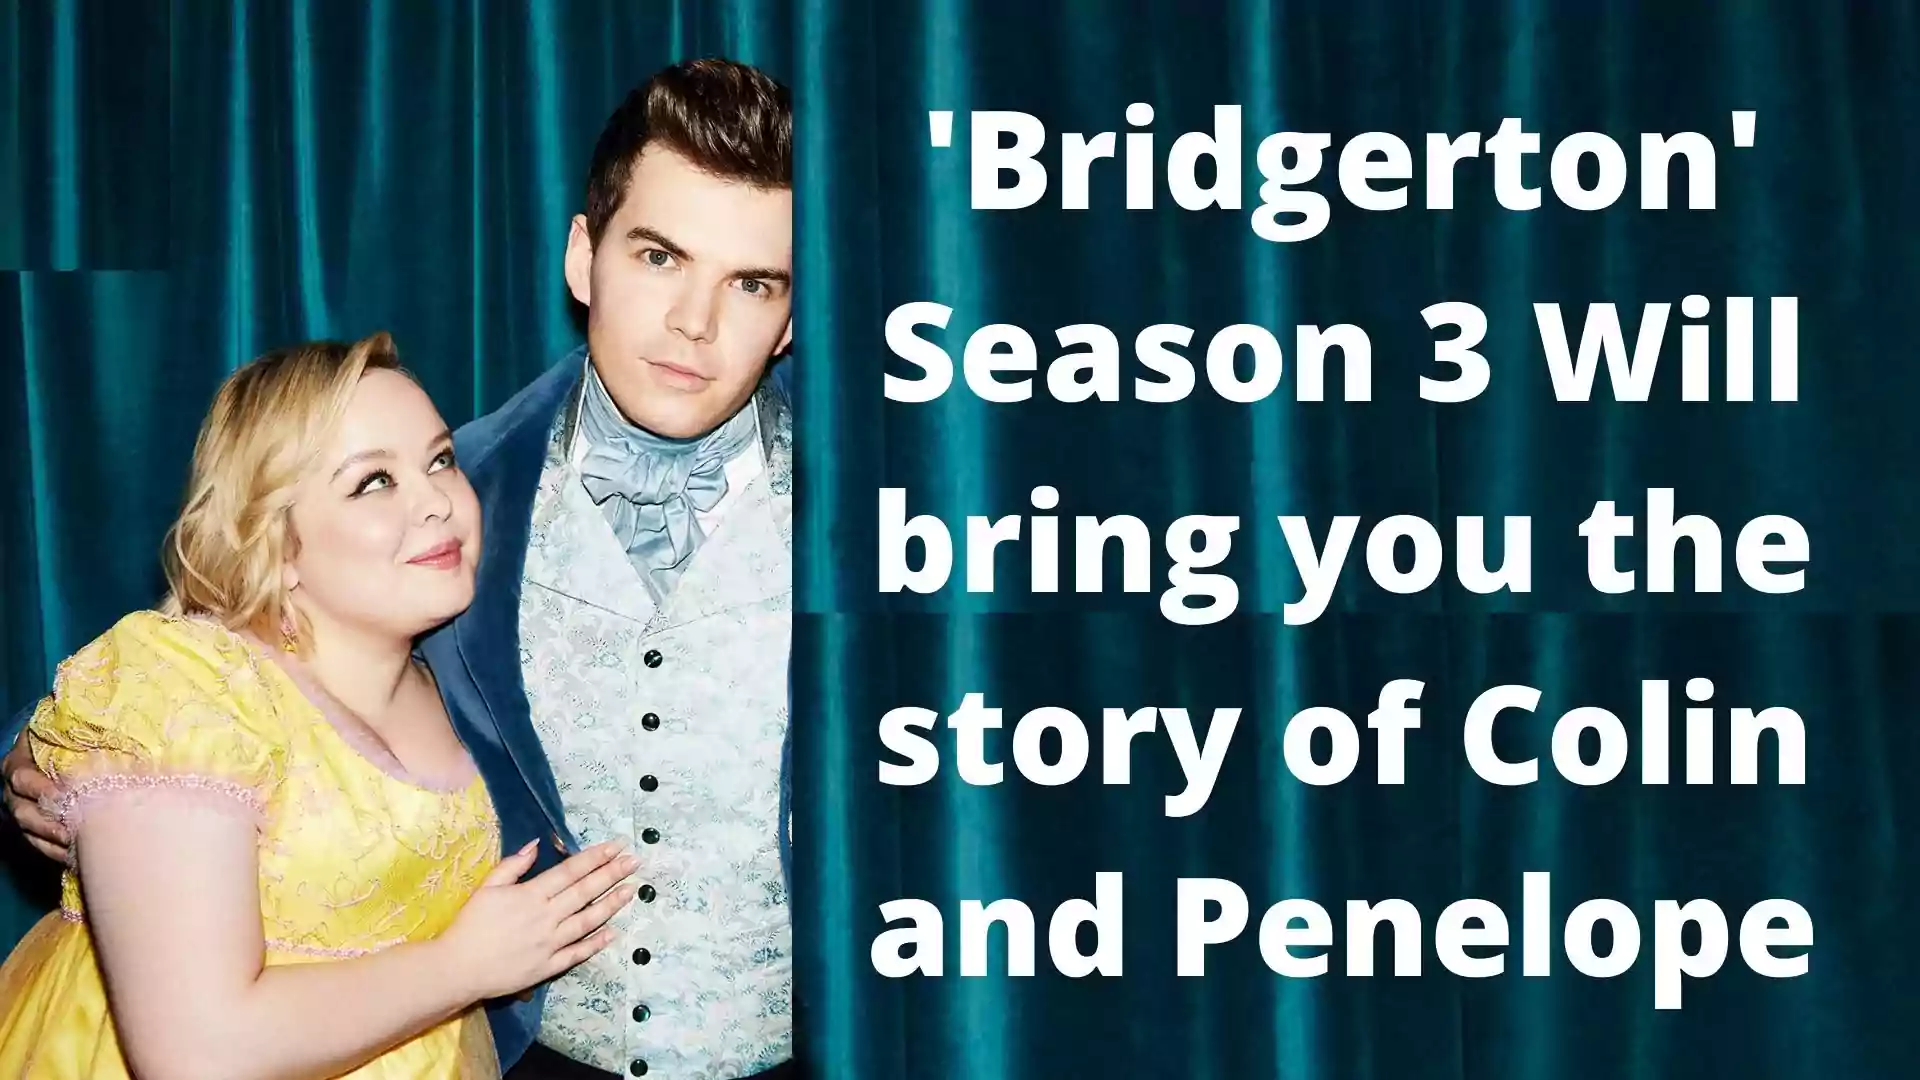 'Bridgerton' Season 3 Will bring you the story of Colin and Penelope